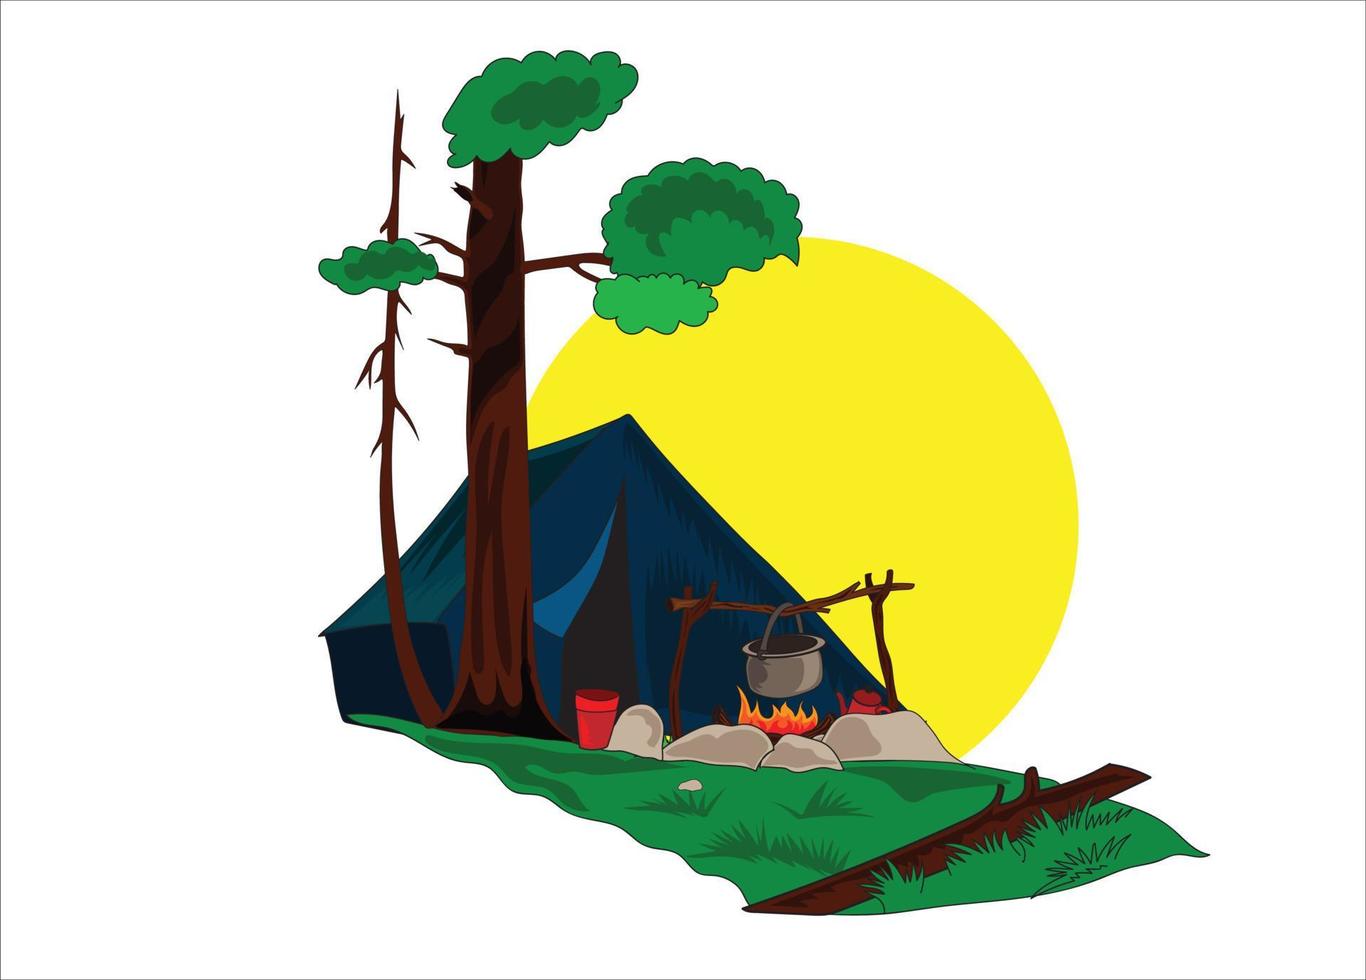 Picnic camping vector illustration on white background